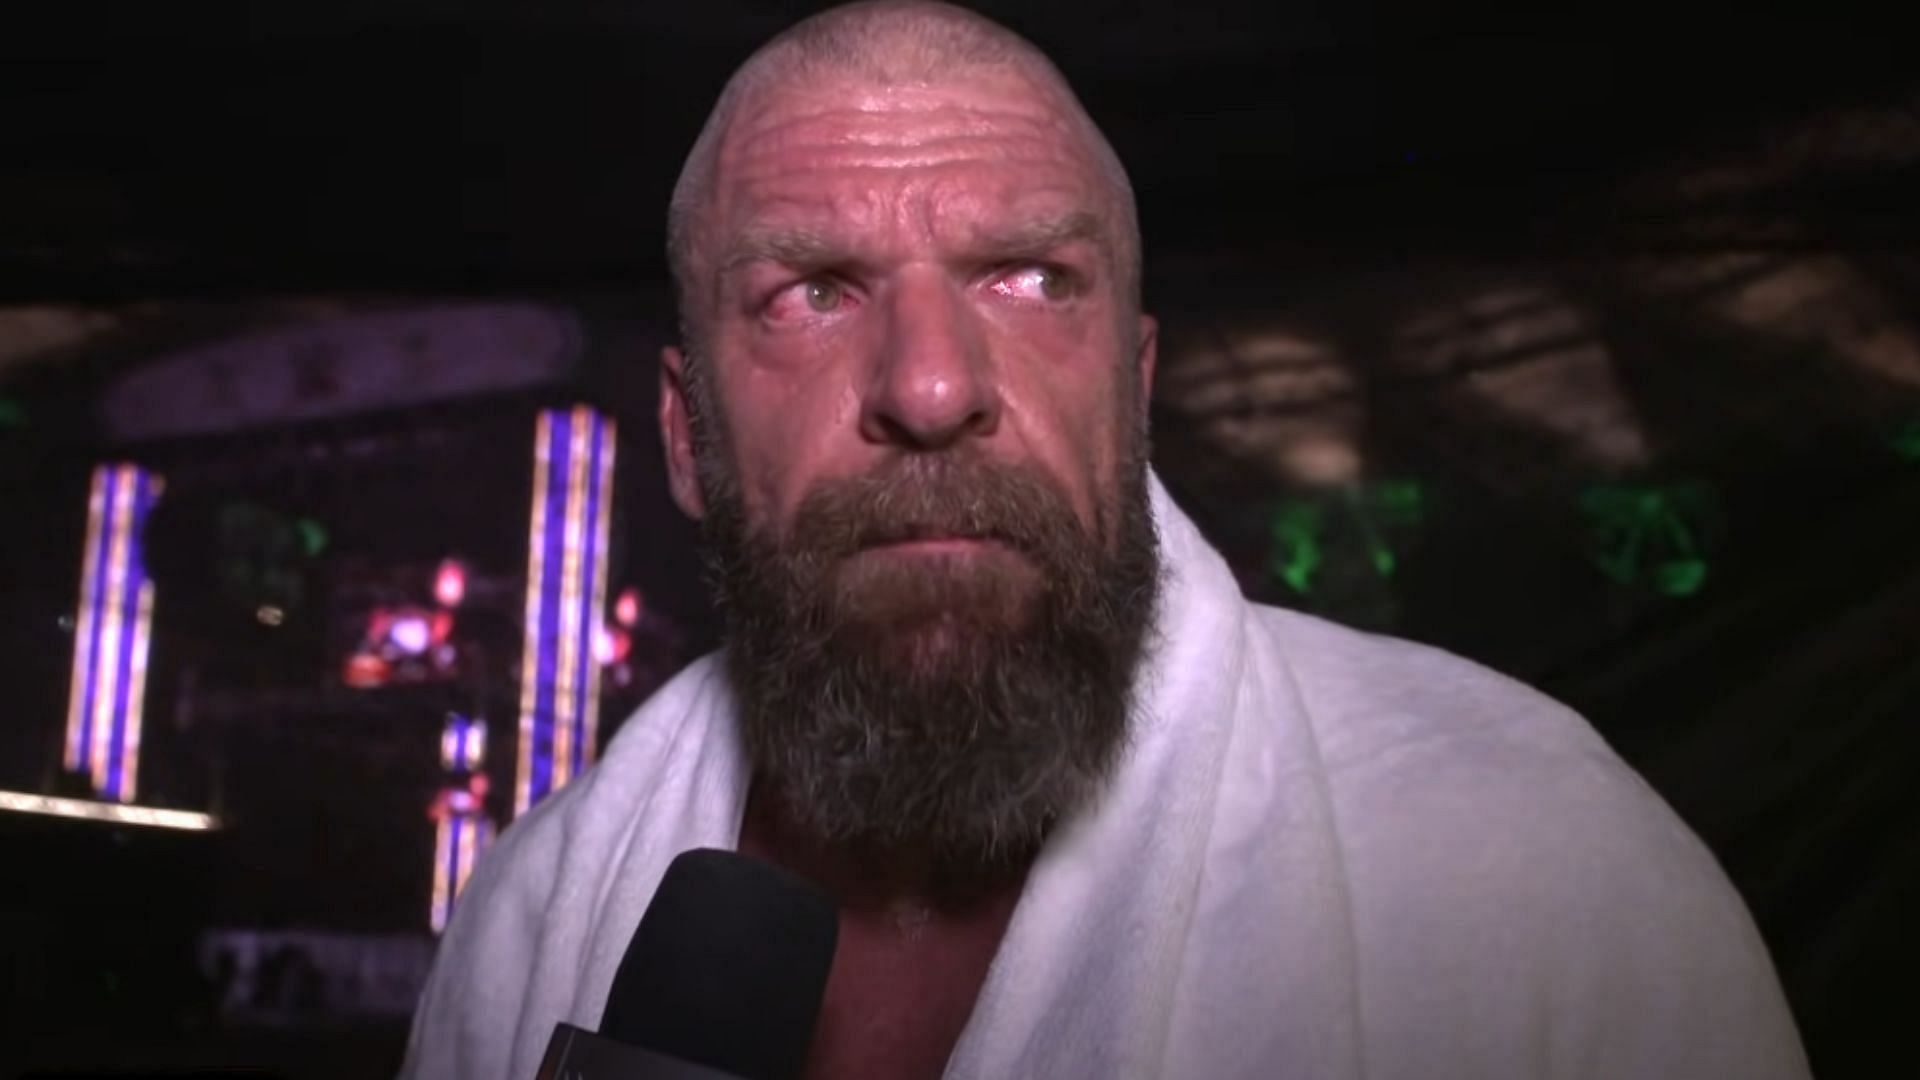 Triple H, real name Paul Levesque